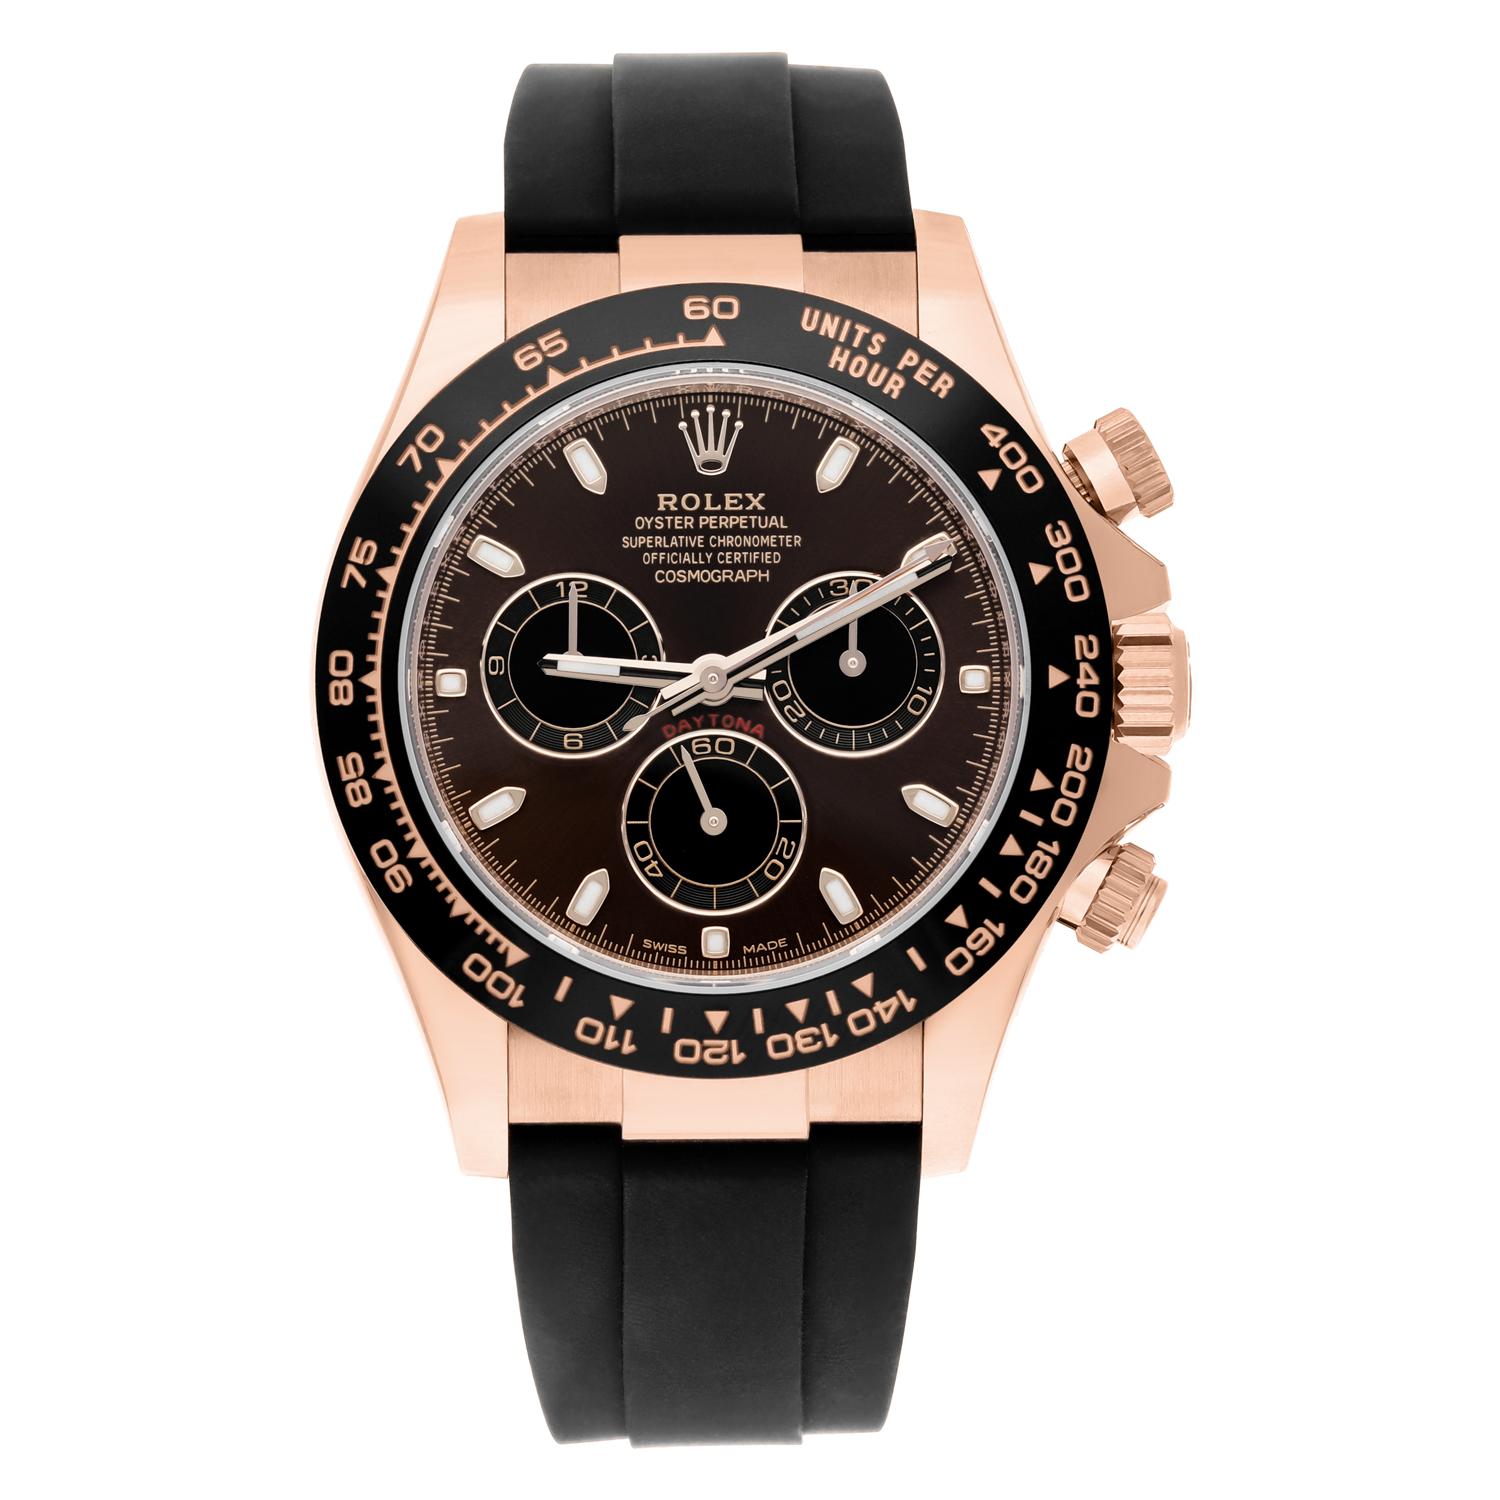 The waterproof Oysterflex bracelet really is a game changer for the Daytona, and looks especially good on this Everose gold example with discontinued sunburst chocolate dial. This watch is under Rolex International Warranty to April 2028. Sale comes